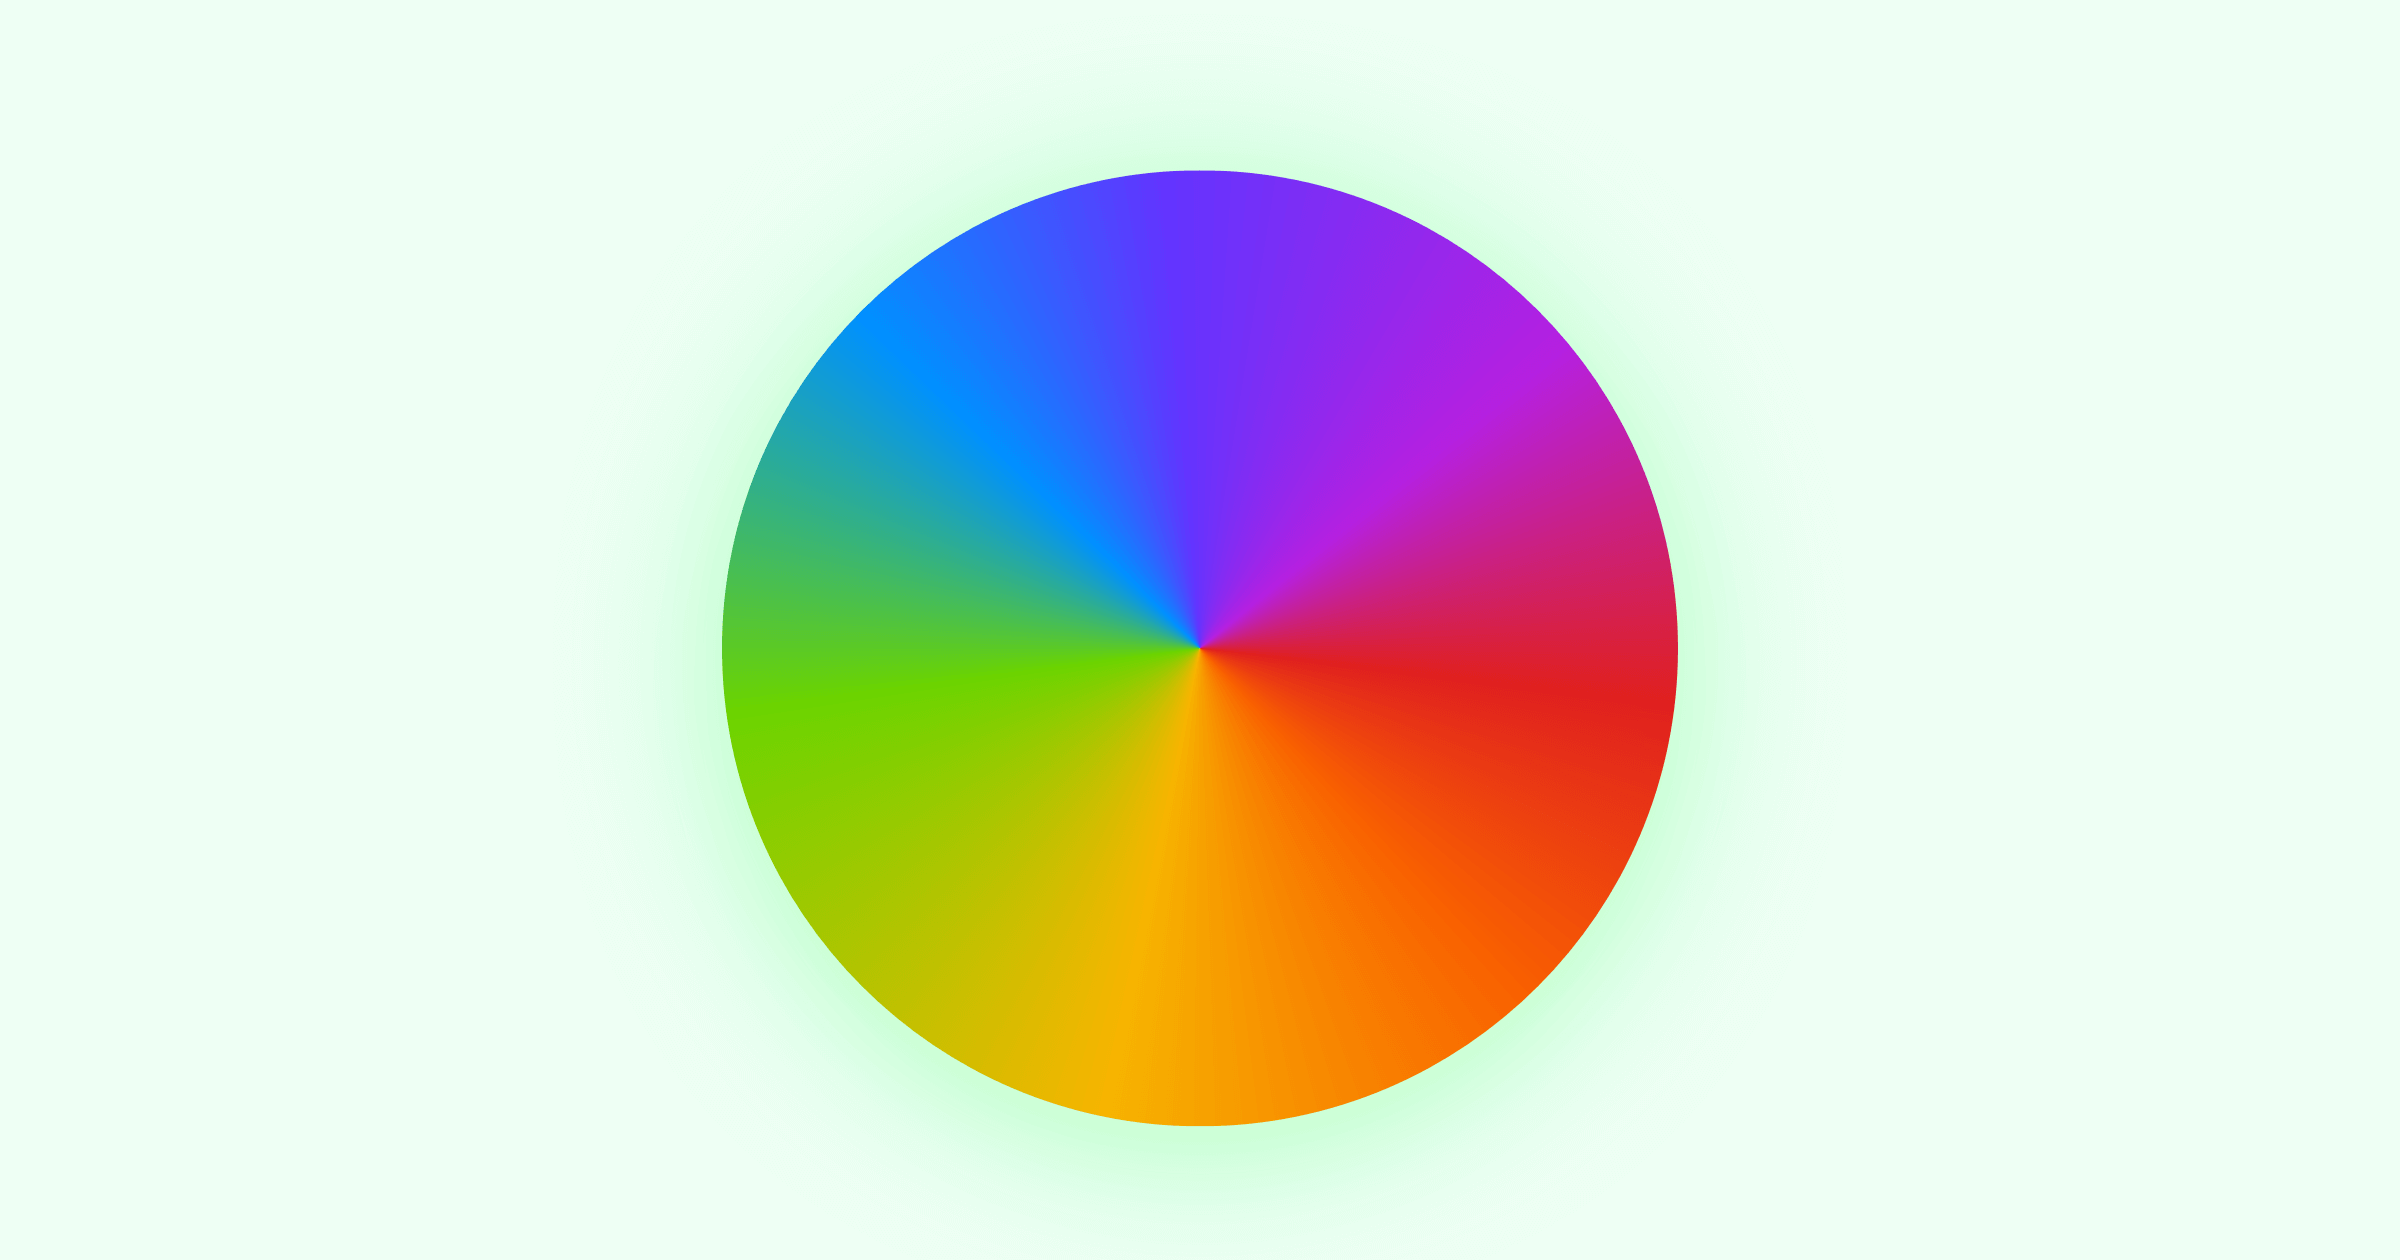 Colors of an app icon - 2022 edition diagram